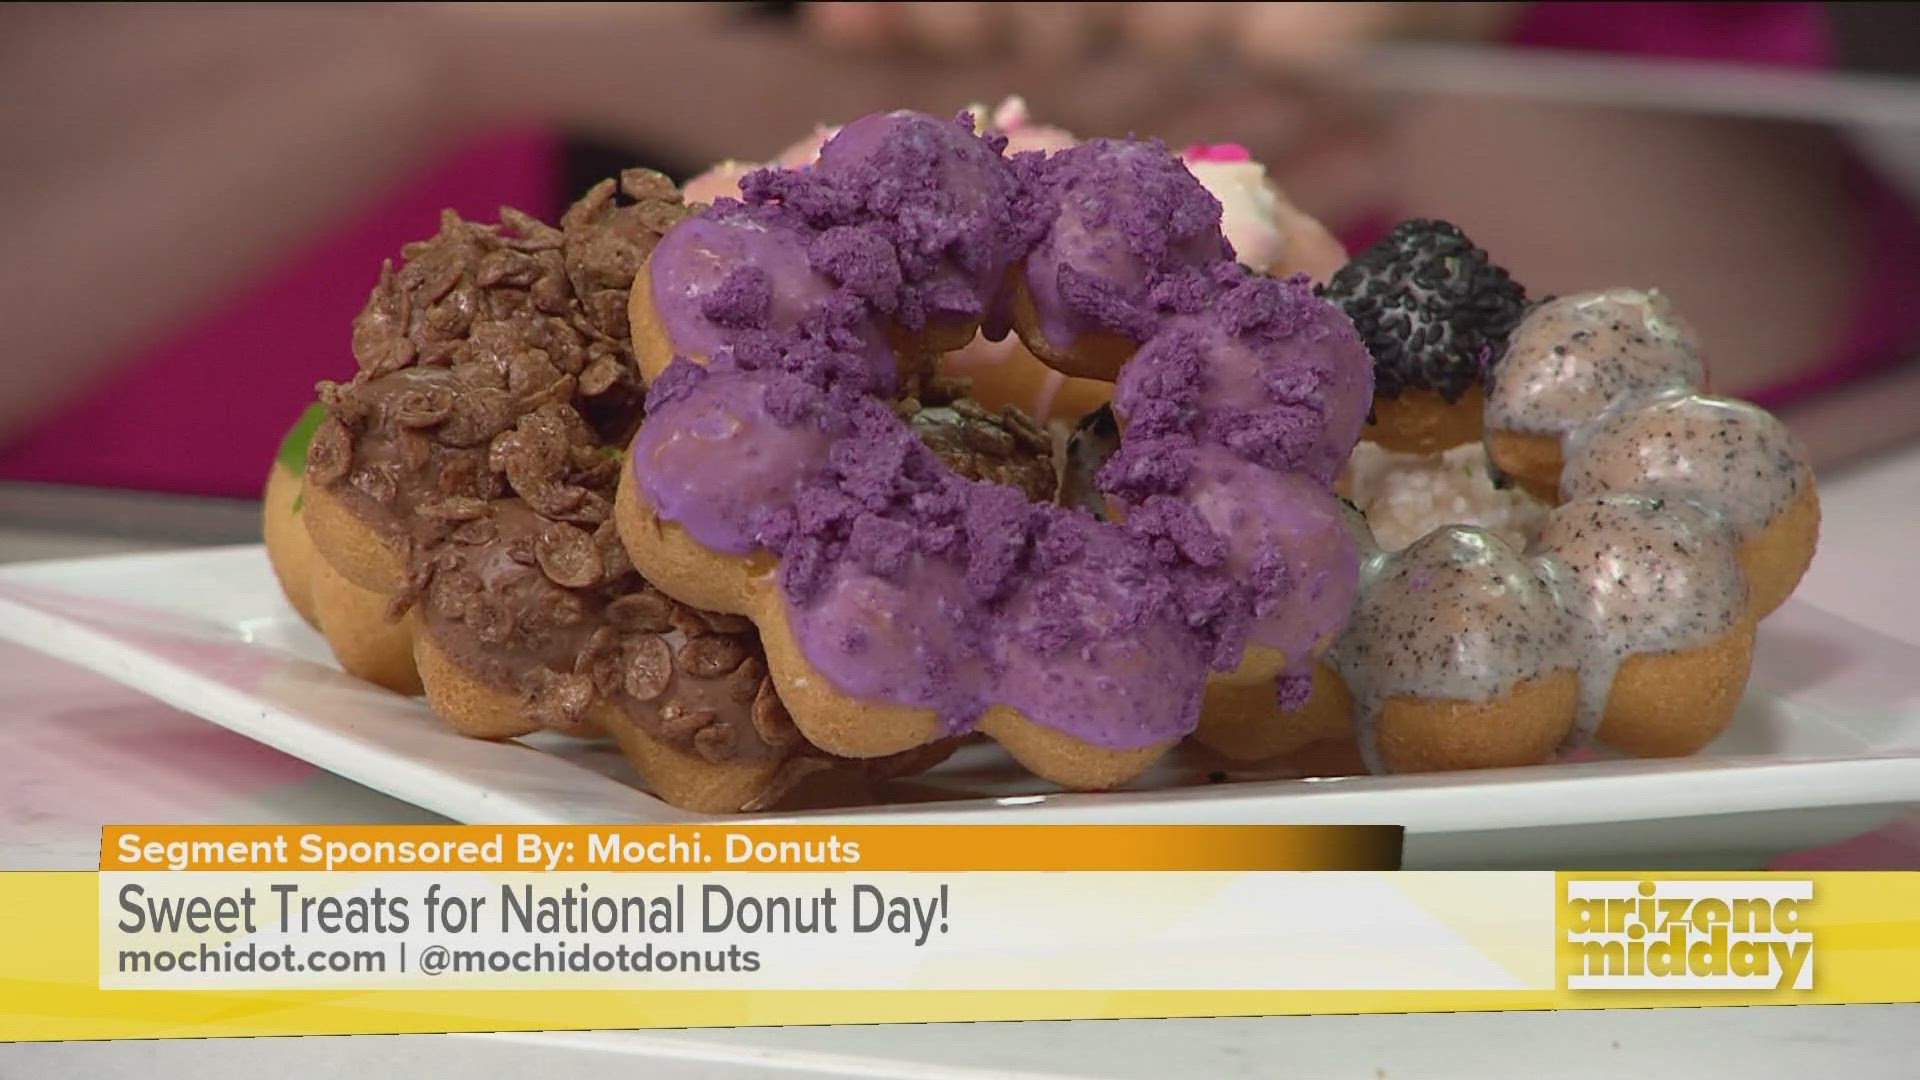 Nicole Williscroft co-founder and owner of Mochi.Donuts tells us what ingredients make their donuts so unique.